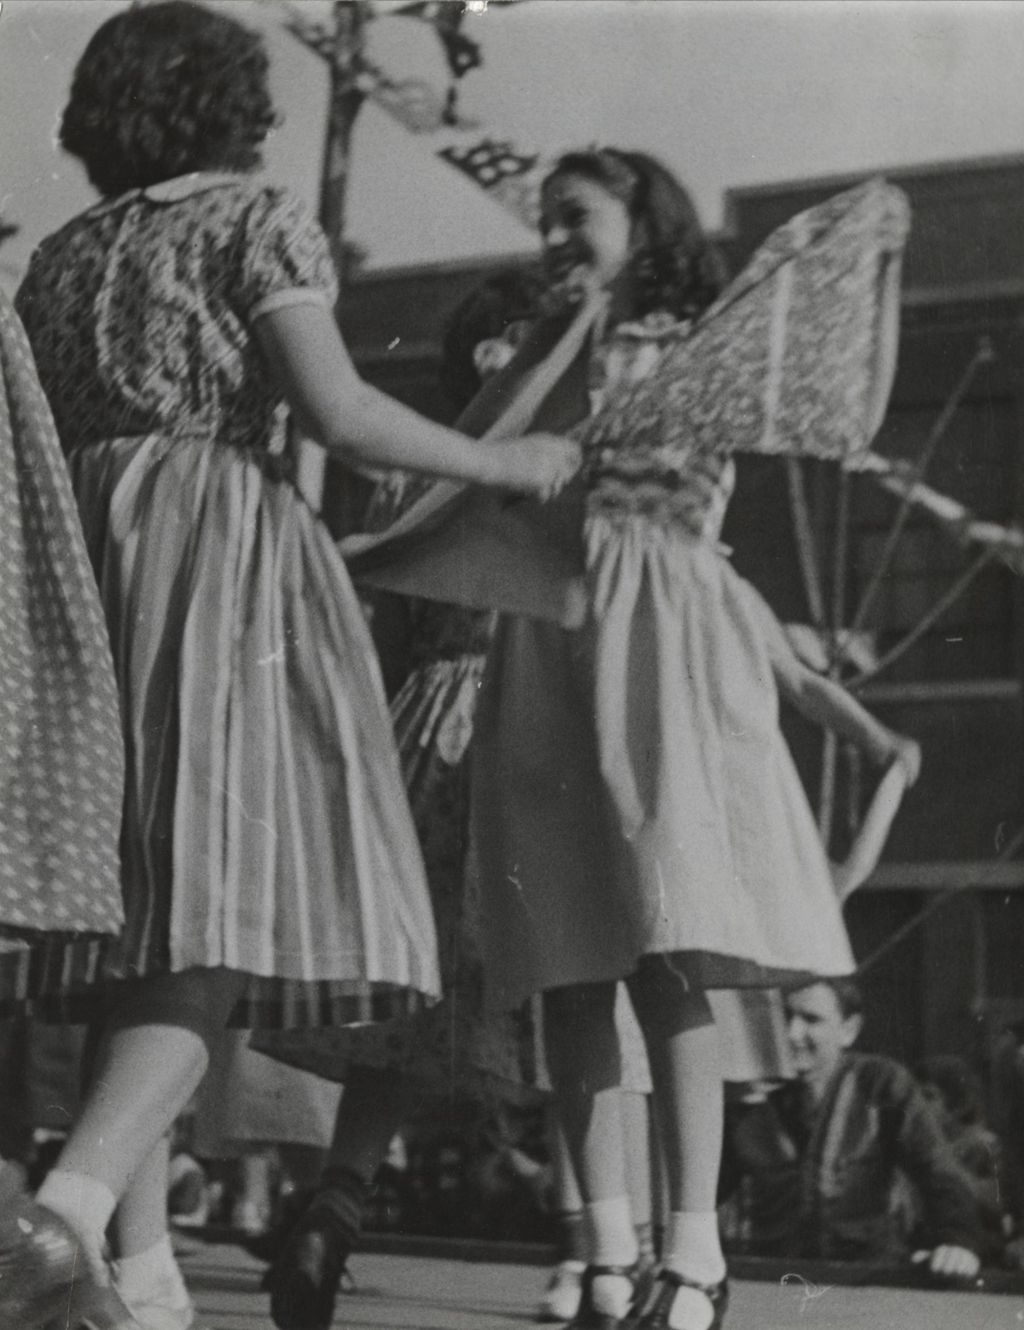 Girls on a stage performing a "Handkerchief Dance" as part of Hull-House 50th Anniversary circus show